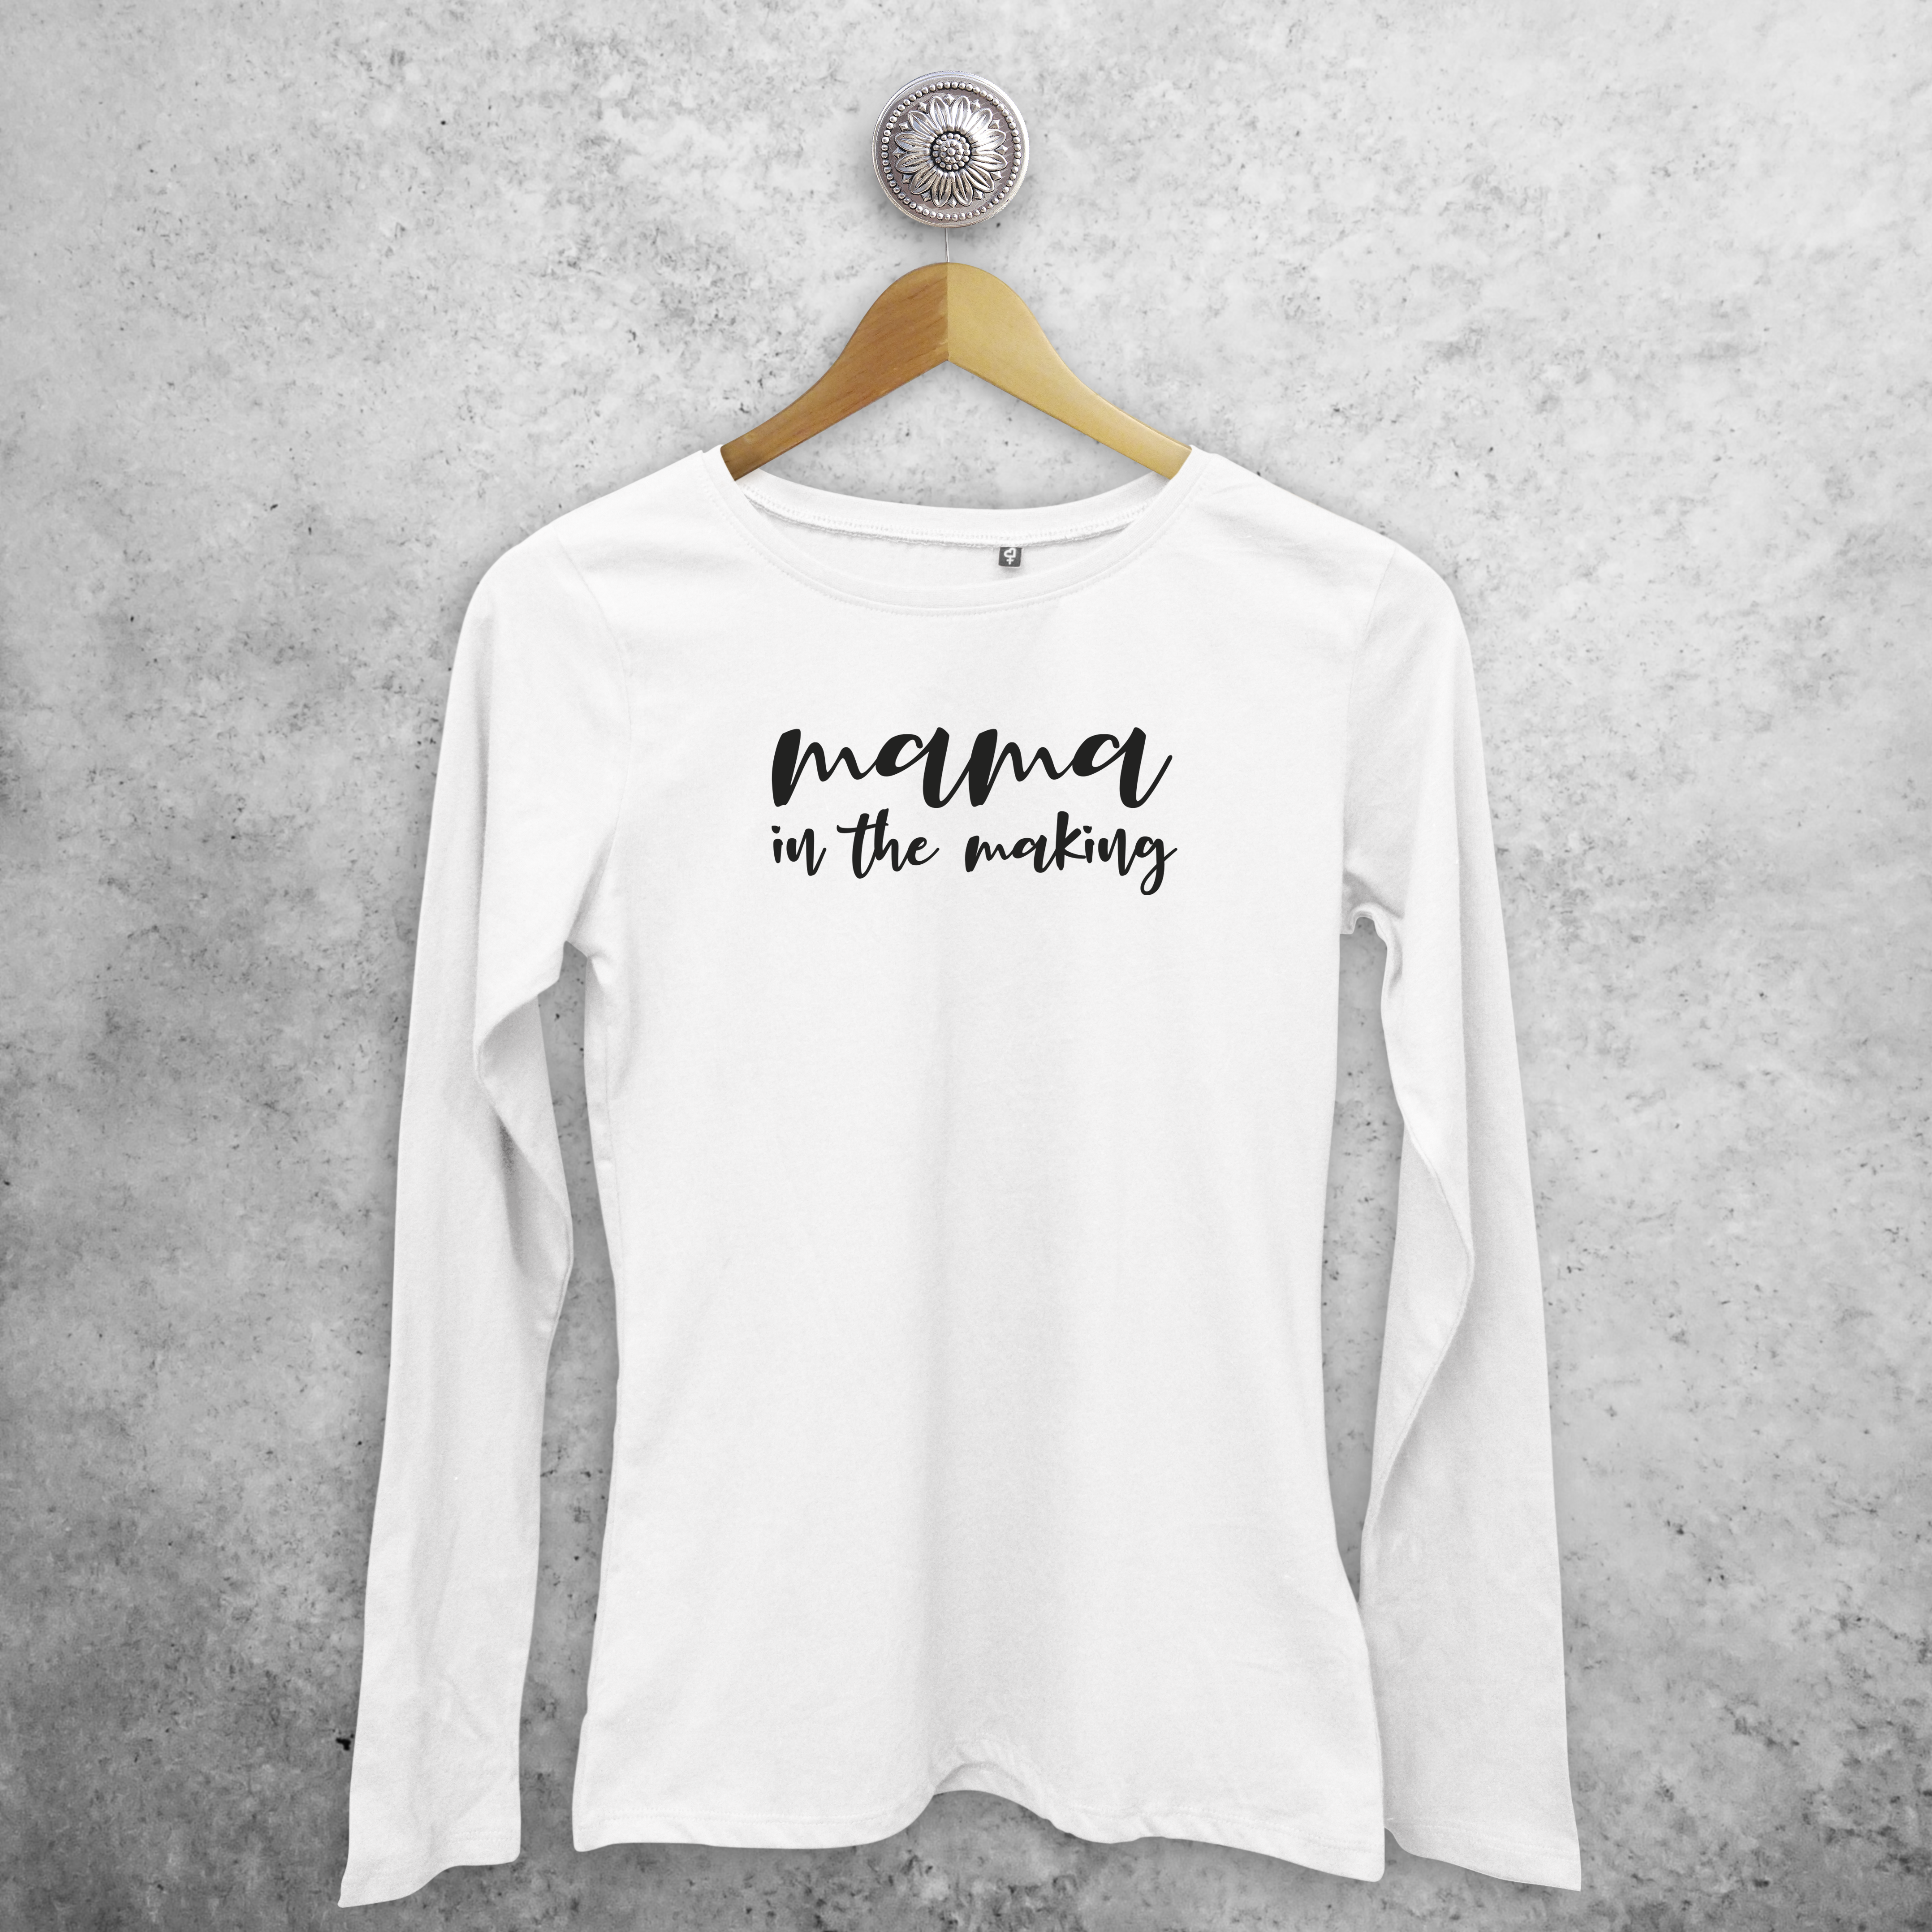 'Mama in the making' adult longsleeve shirt